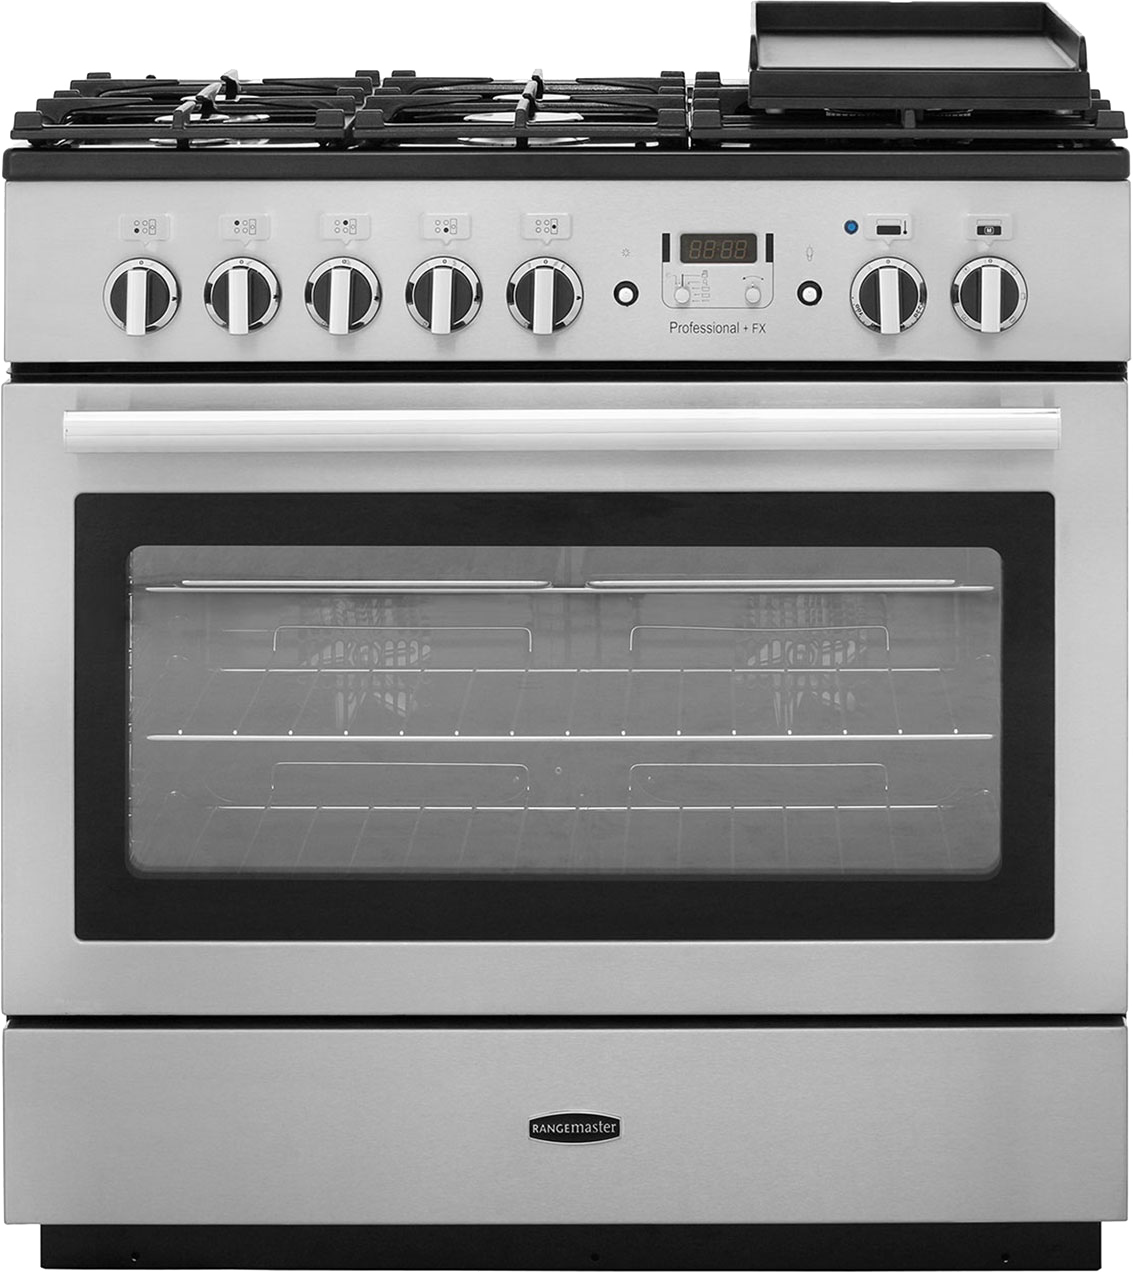 Rangemaster Professional Plus FX PROP90FXDFFSS/C 90cm Dual Fuel Range Cooker - Stainless Steel / Chrome - A Rated, Stainless Steel